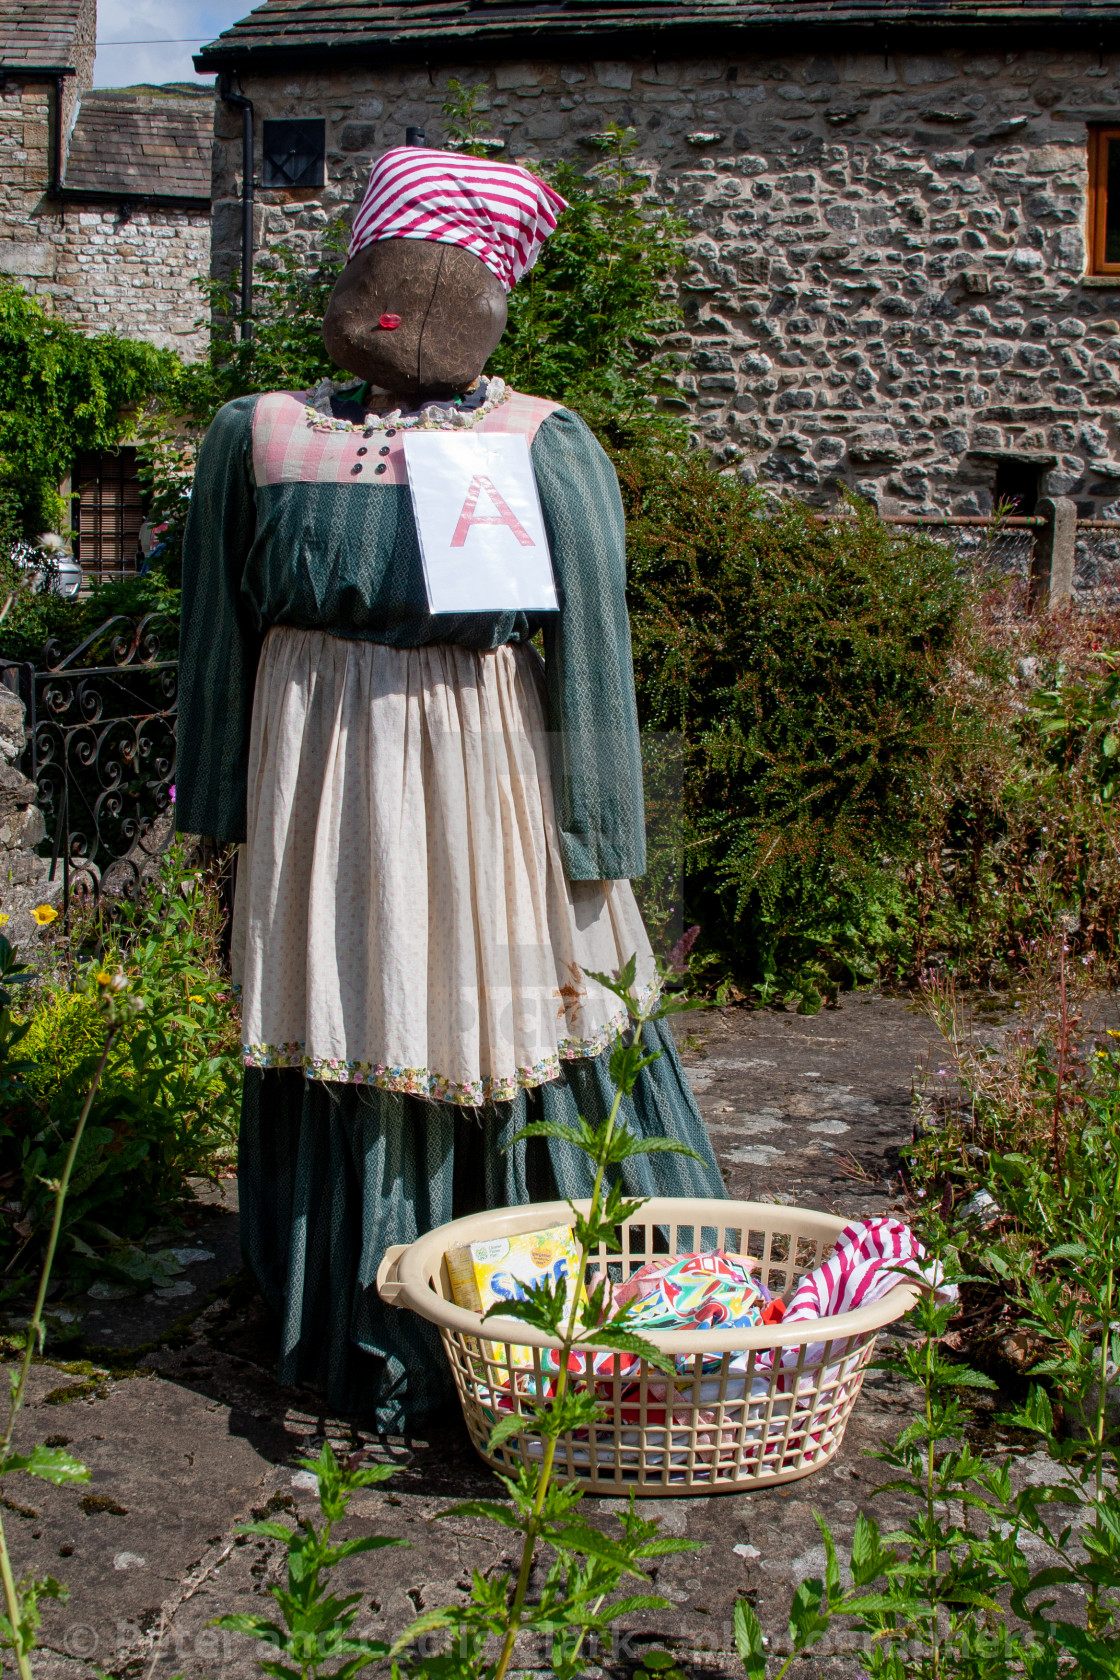 "Kettlewell Scarecrow Festival and Trail, Scarecrow with Washing. Yorkshire Dales, England." stock image